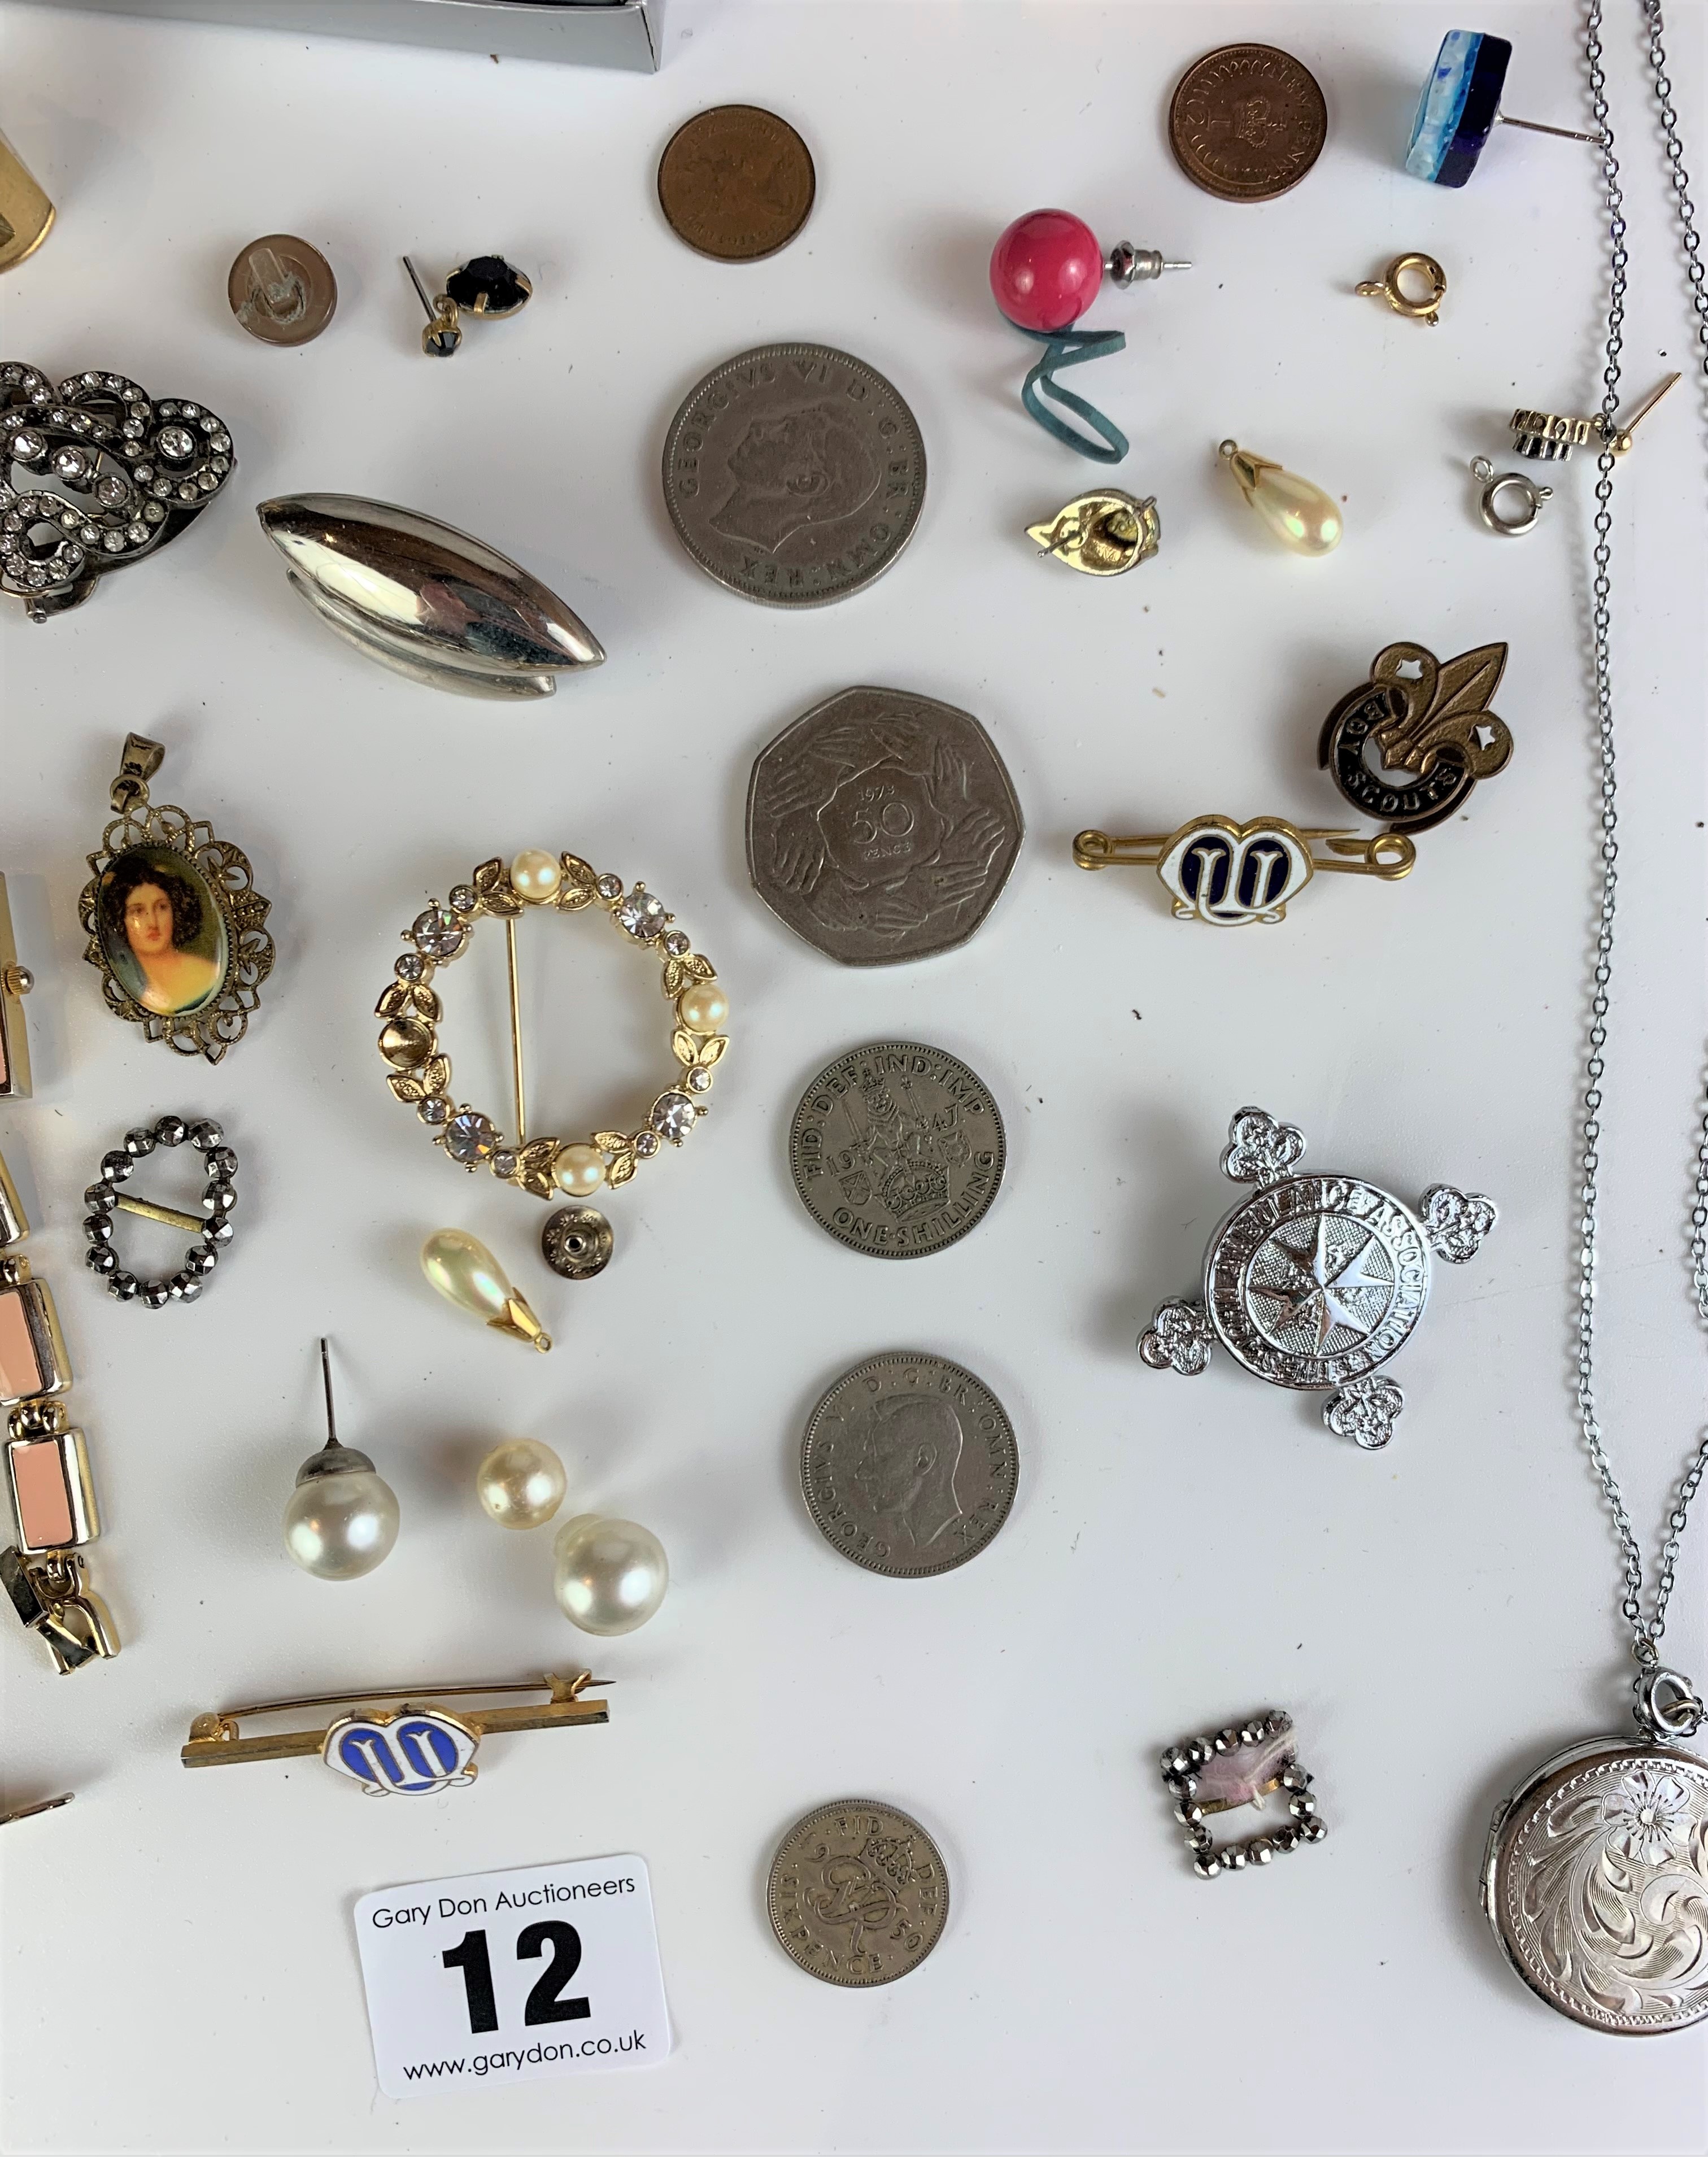 Dress jewellery including brooches, earrings, rings, souvenir spoon, odd coins and Azur watch - Image 4 of 9